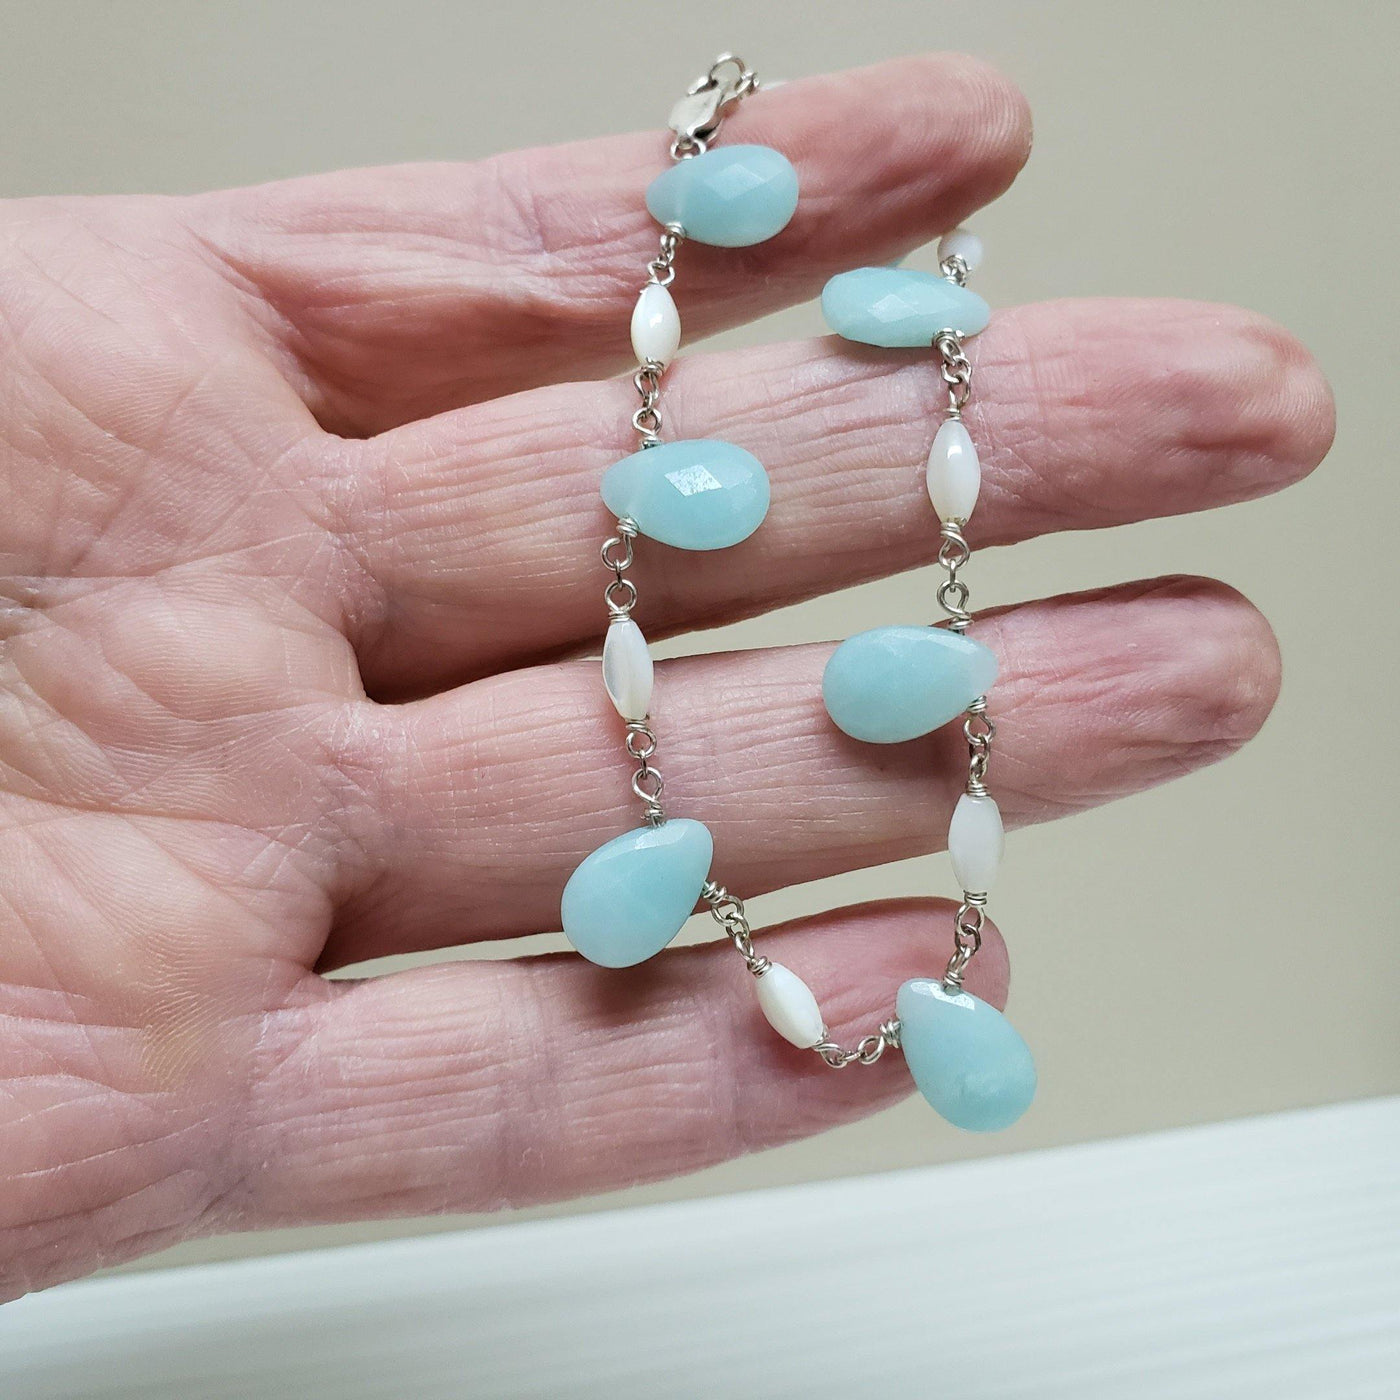 Blue chalcedony and silver bracelet - LB Designs